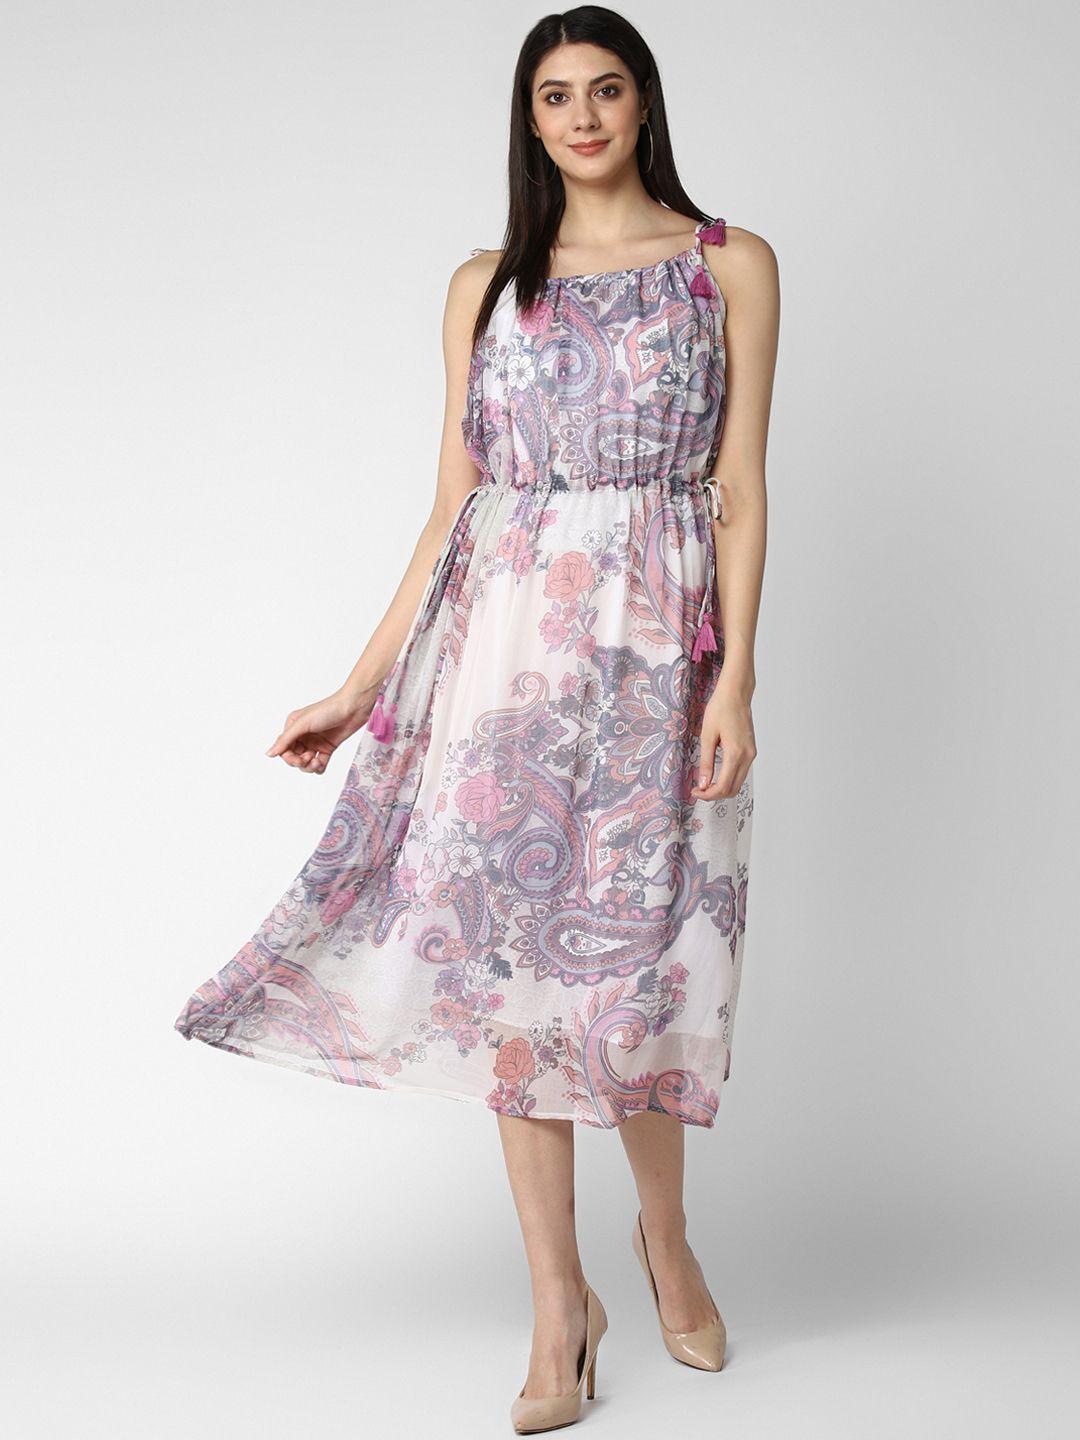 stylestone women lavender & white printed fit and flare dress